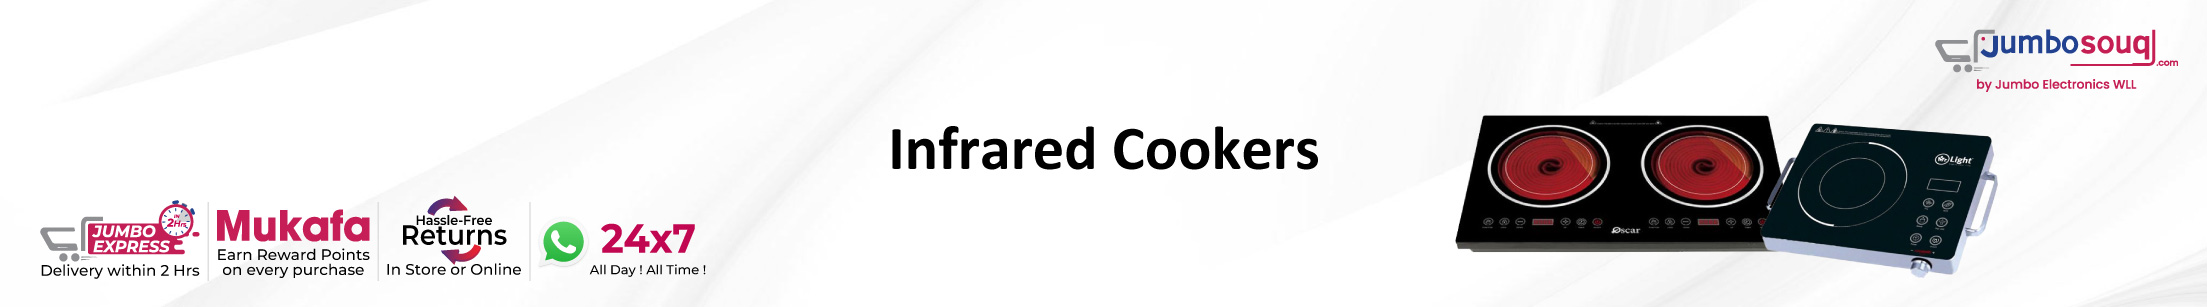 Infrared Cookers